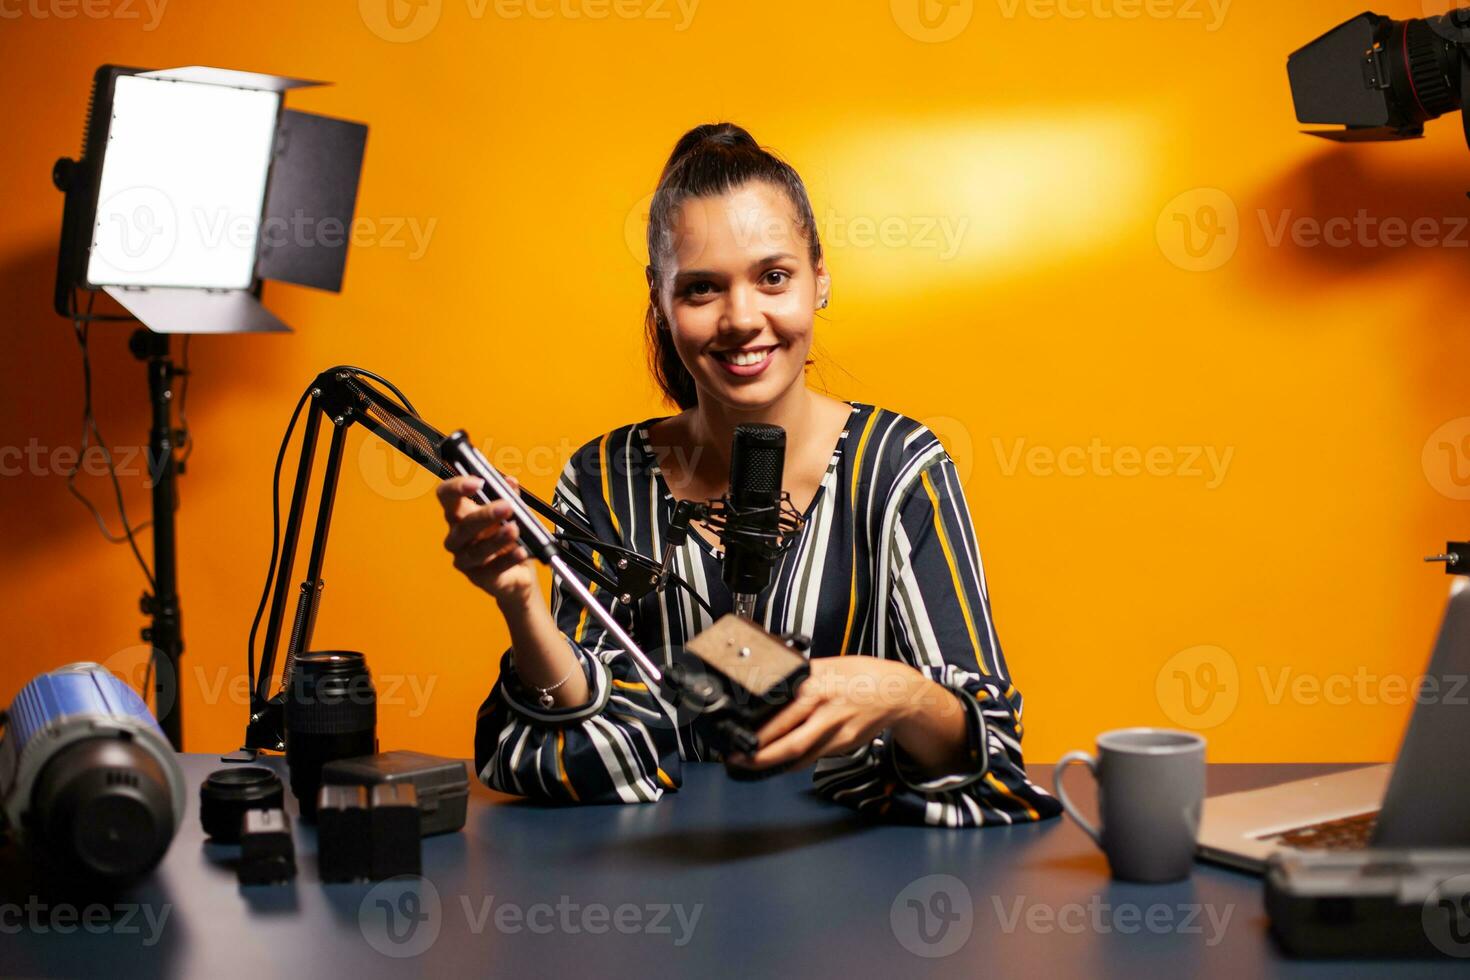 Holding videography equipment and recording podcast. Social media star making online internet content about video equipment for web subscribers and distribution, film photo